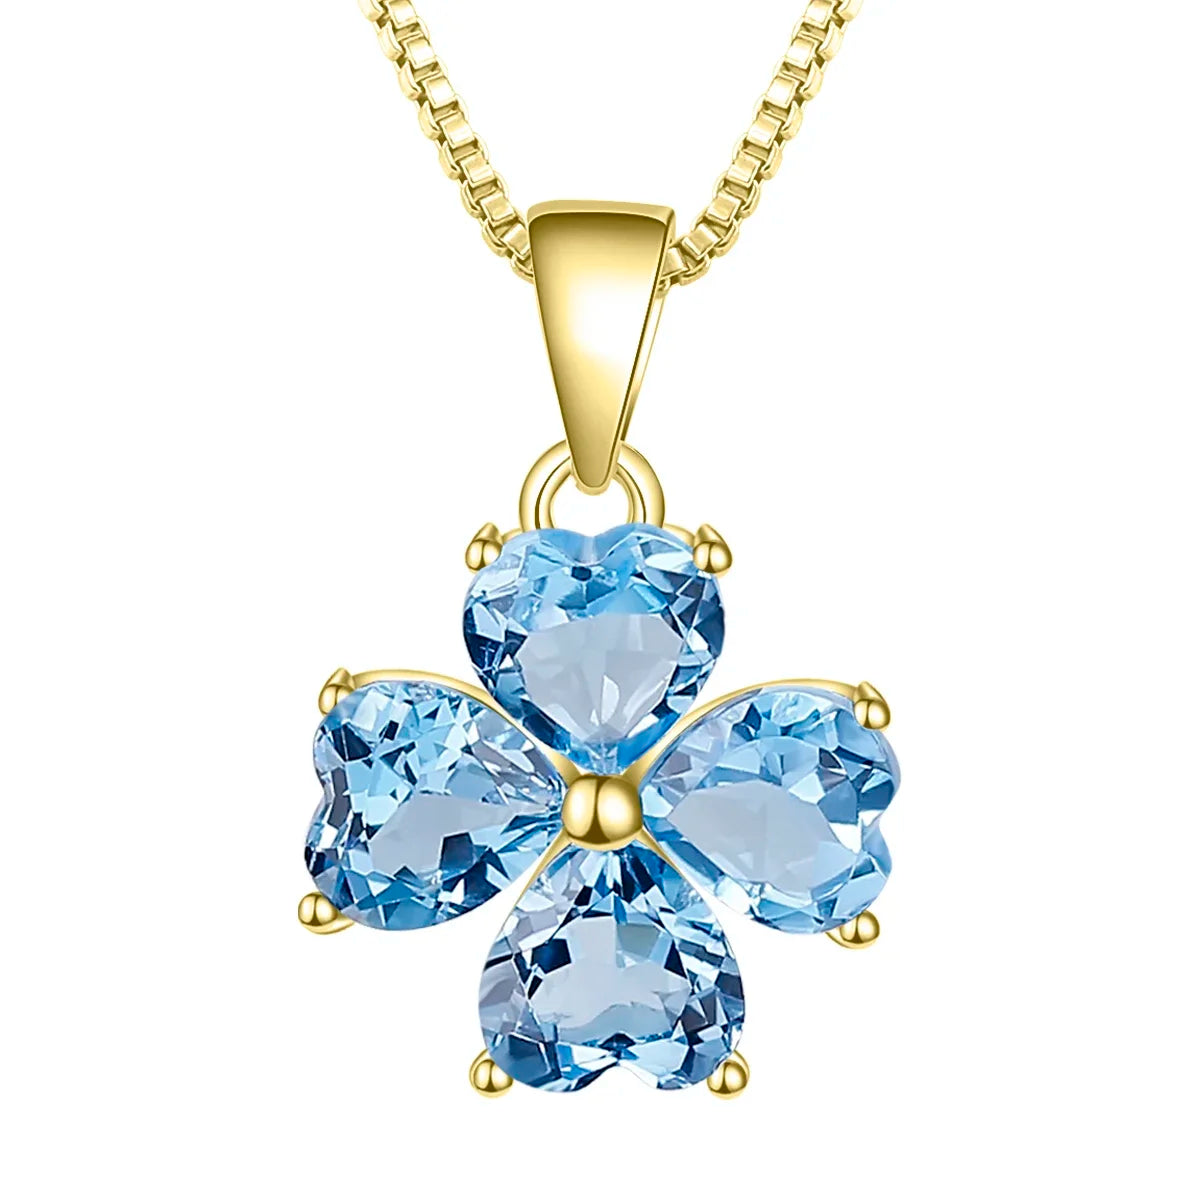 GEM'S BALLET 0.95ct Natural Swiss Blue Topaz Clover Design Solid 585 14K 10K 18K Gold 925 Silver Pendant Necklace For Women Gift Yellow Gold CHINA